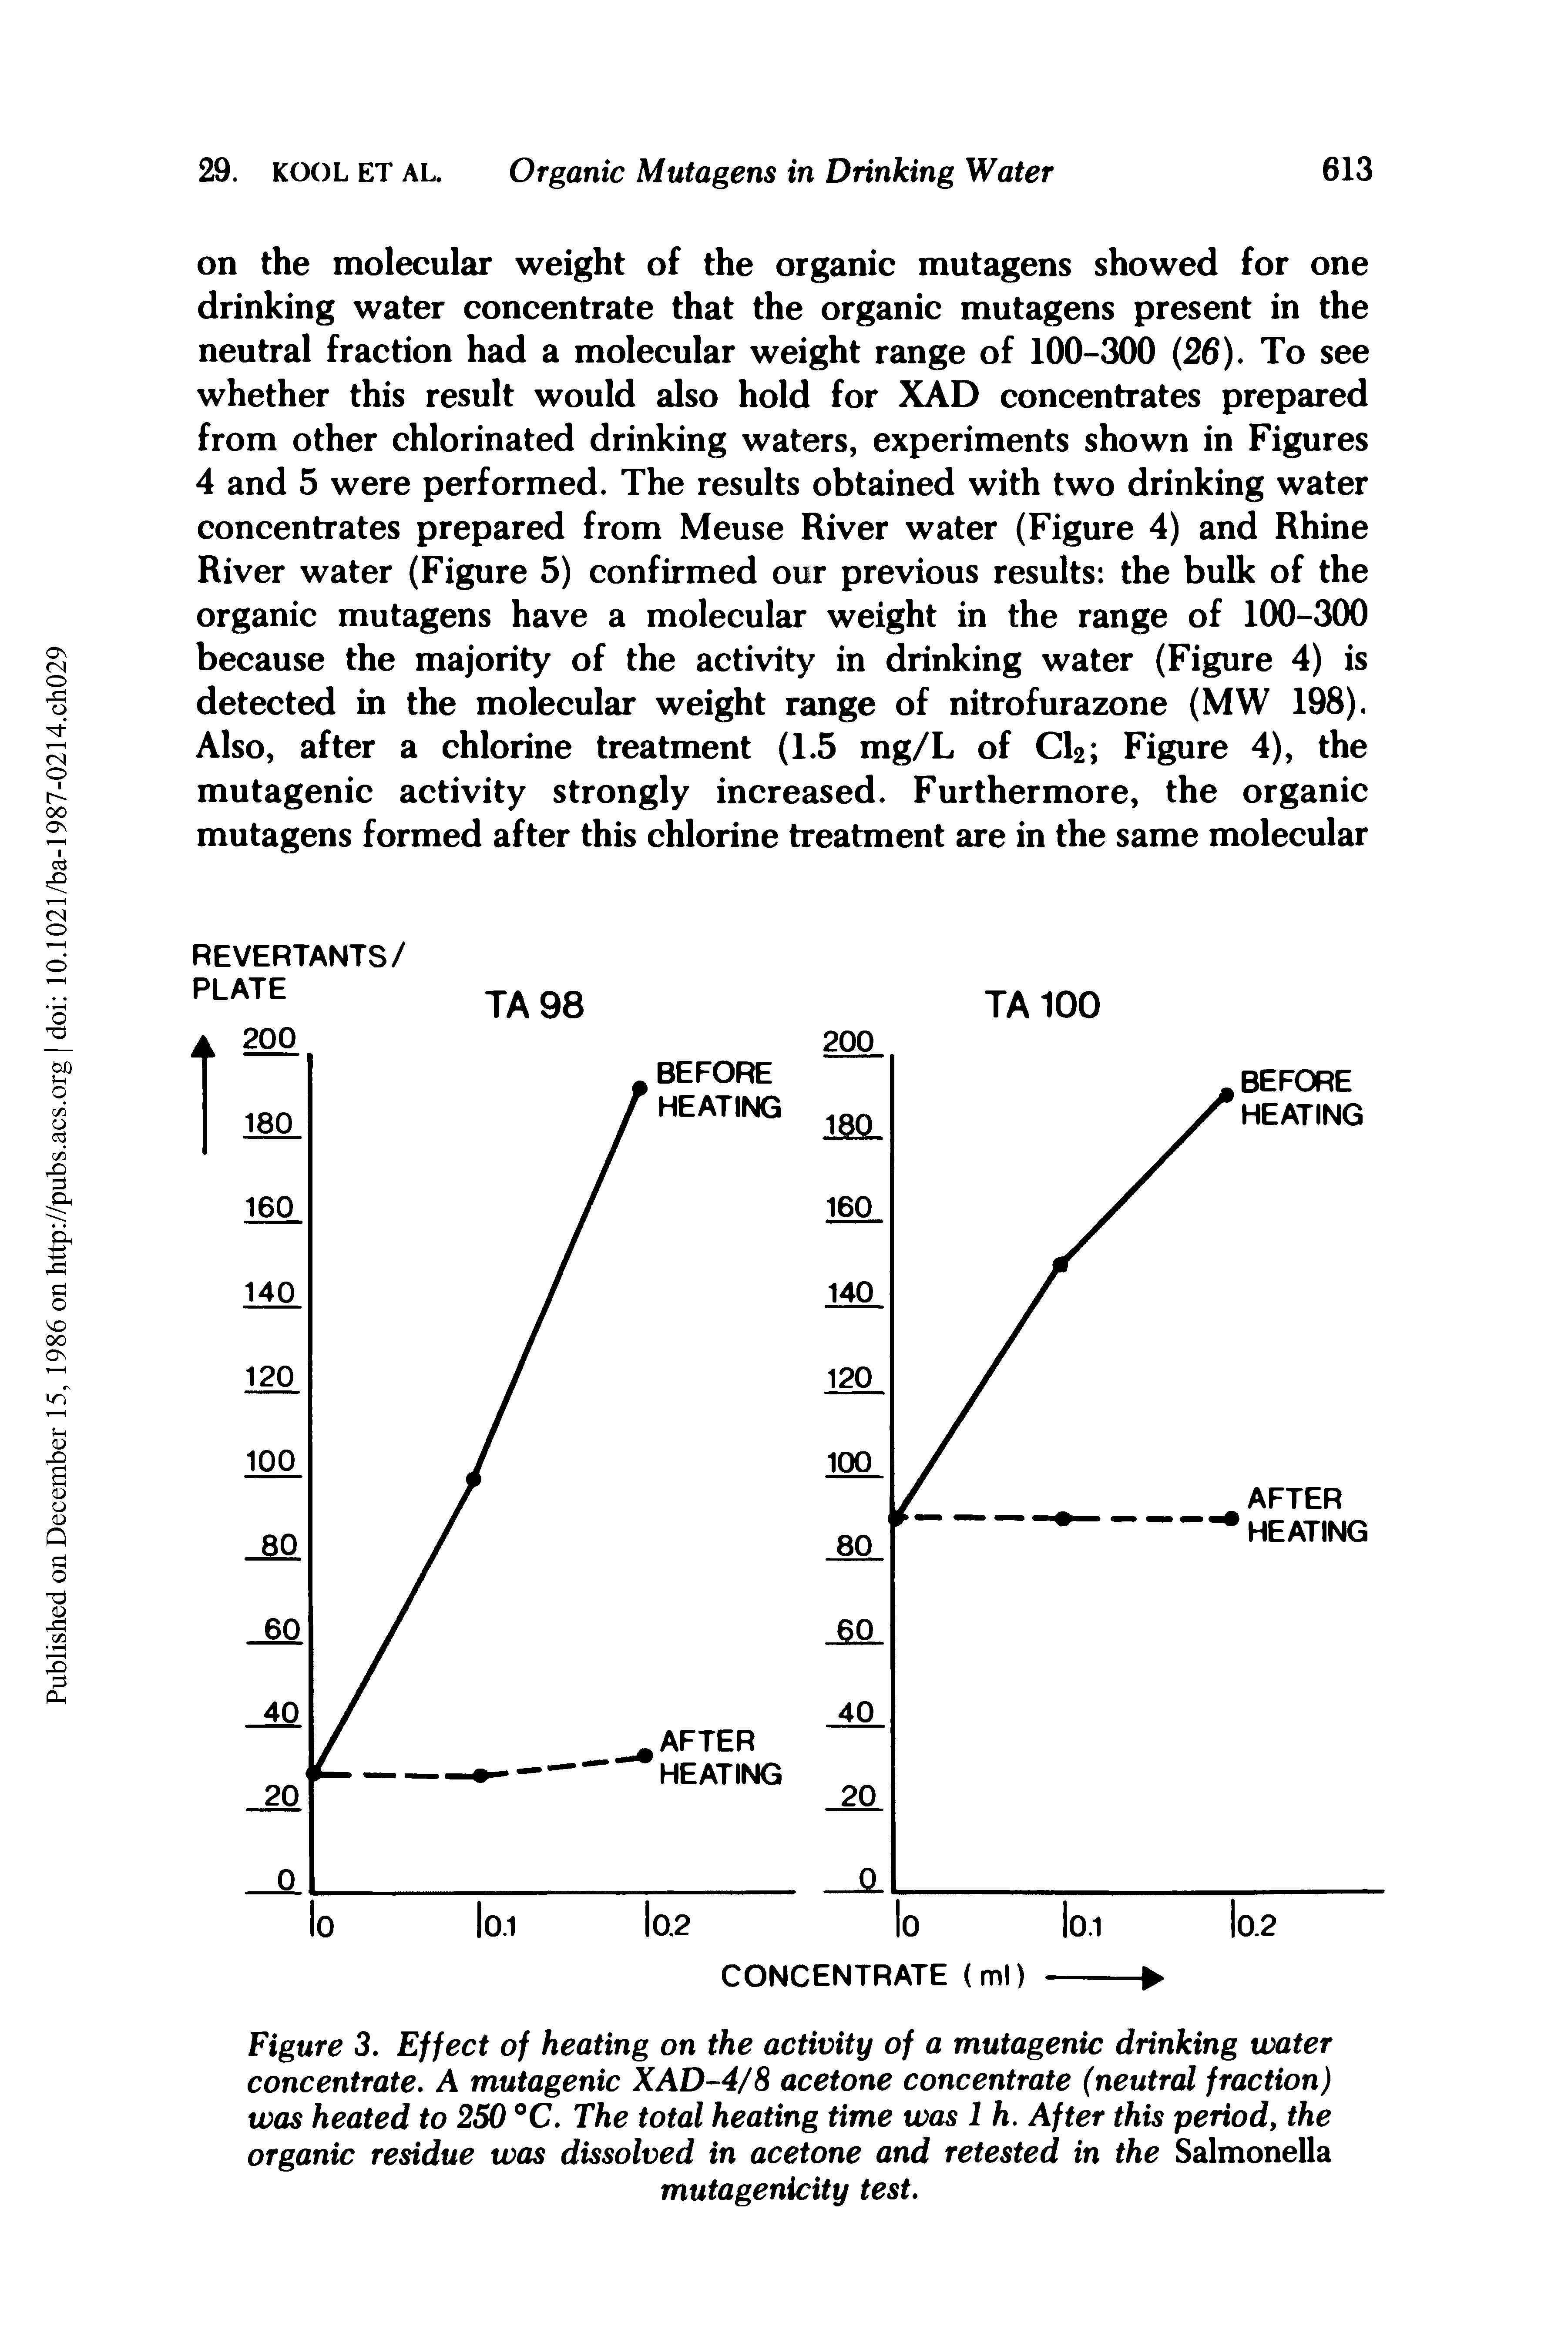 Figure 3. Effect of heating on the activity of a mutagenic drinking water concentrate. A mutagenic XAD-4/8 acetone concentrate (neutral fraction) was heated to 250 °C. The total heating time was 1 h. After this period, the organic residue was dissolved in acetone and retested in the Salmonella...